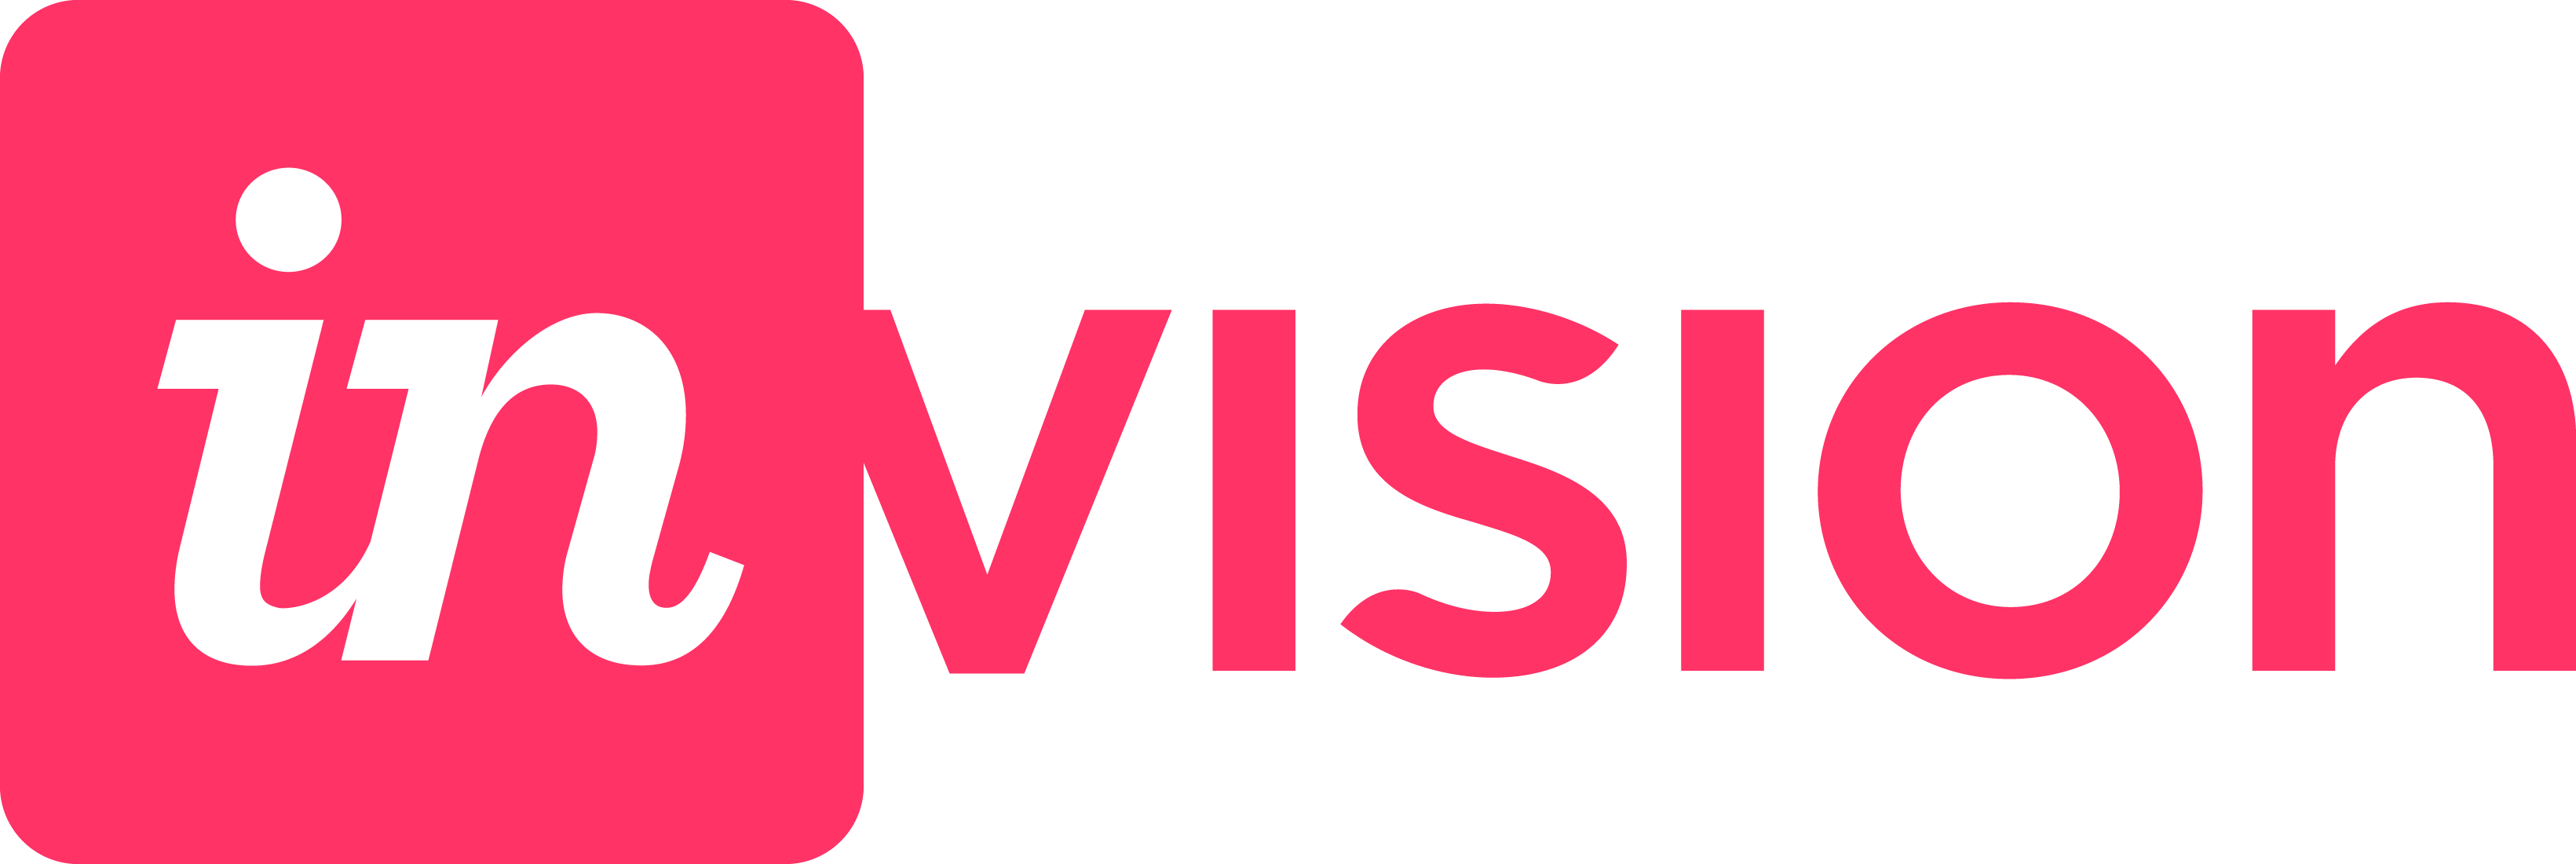 Get A Remote Job You Can Do Anywhere - Invision Logo Png (3281x1100)